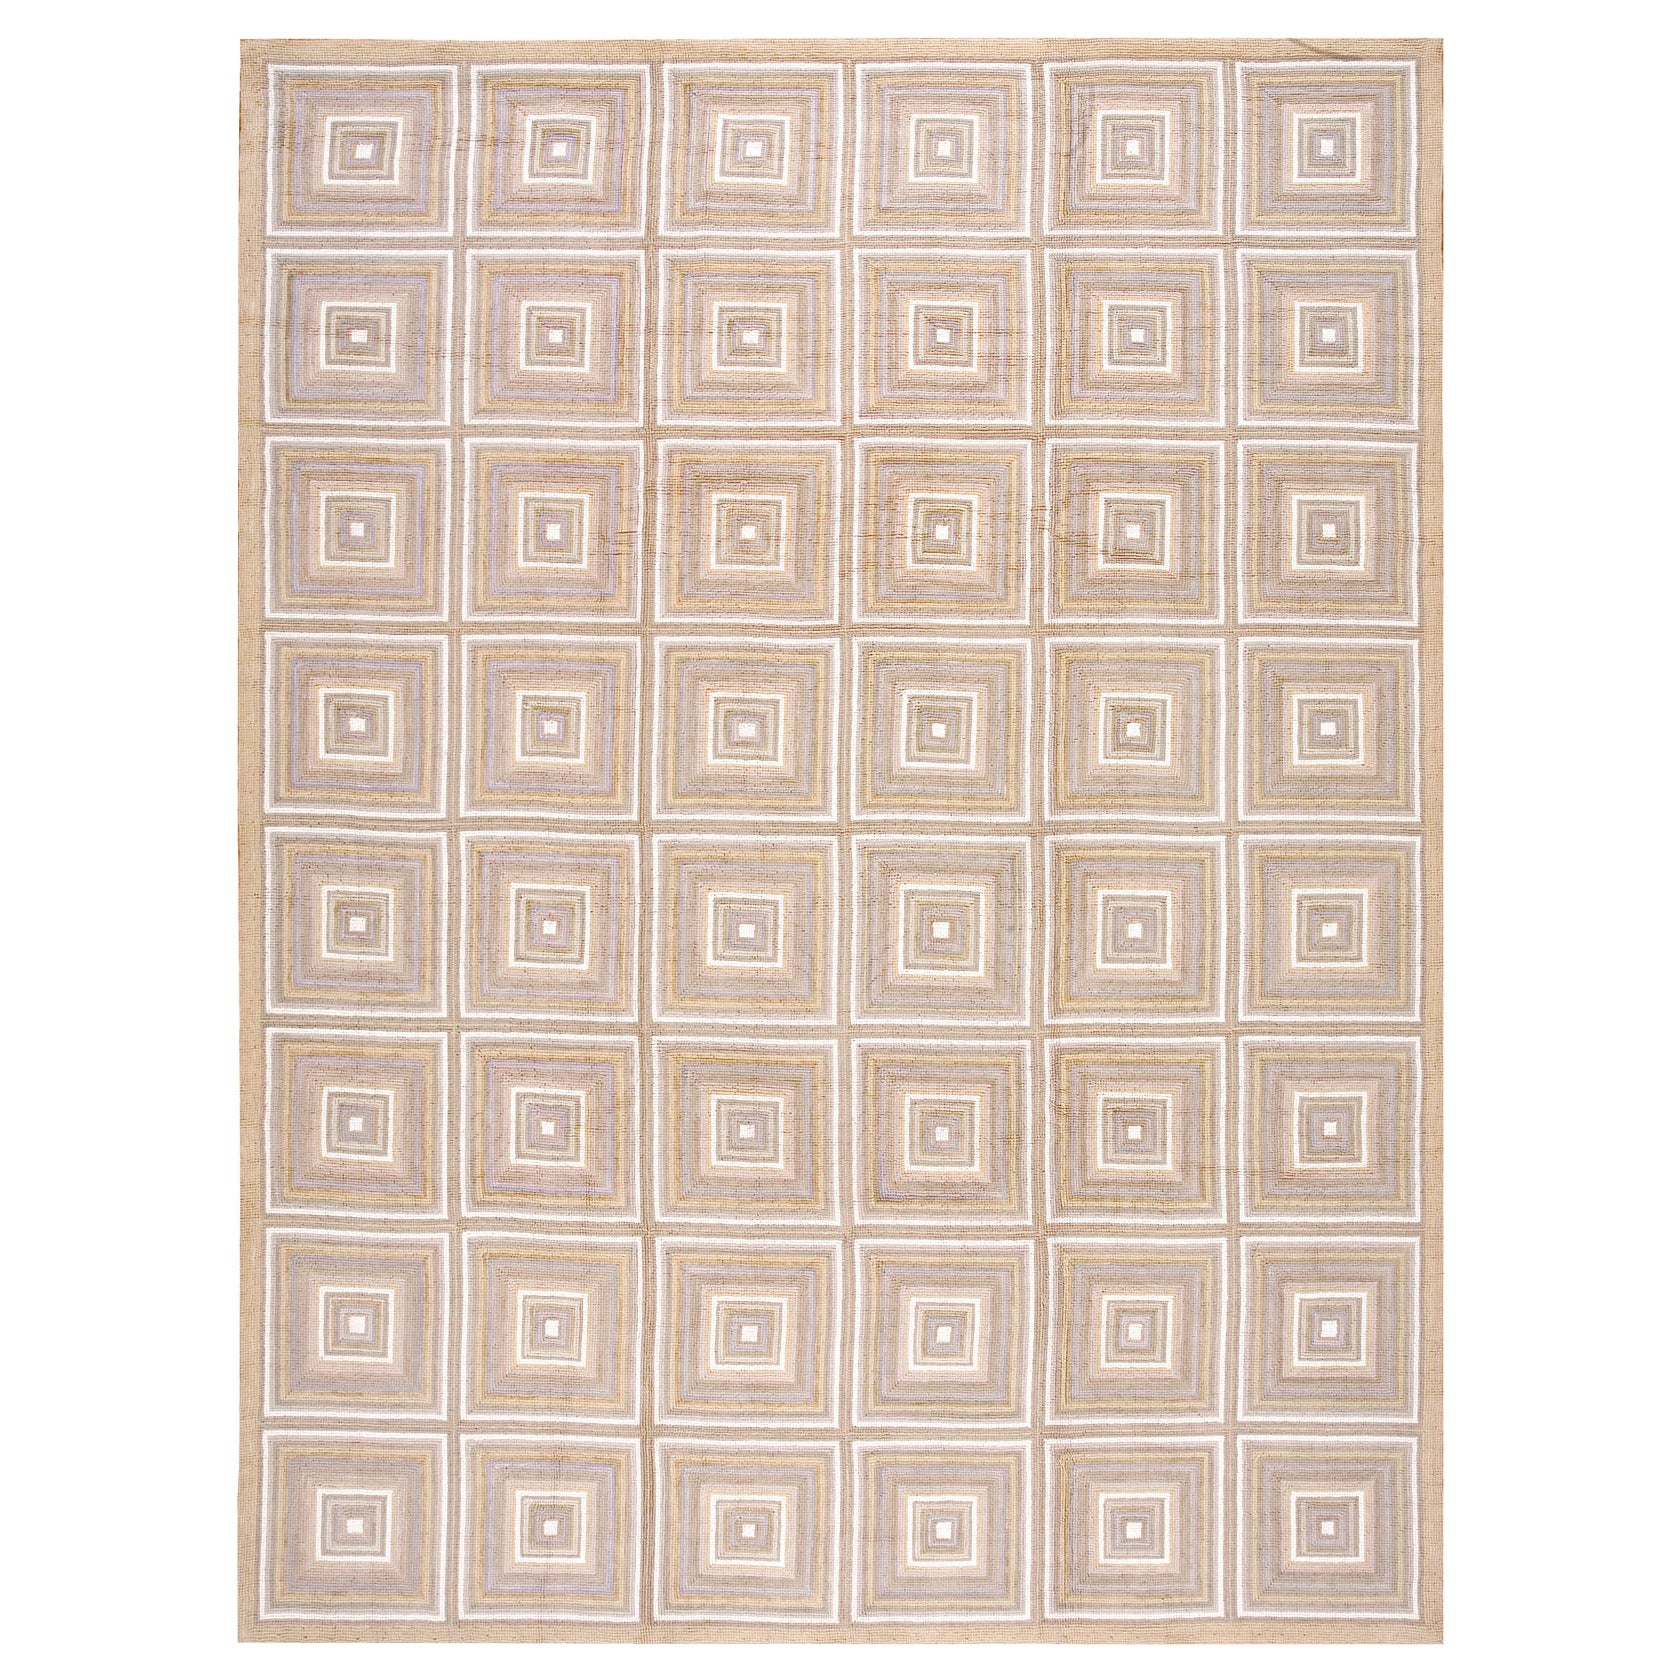 Contemporary Cotton Hooked Rug  (9' x 12' - 274 x 365 ) For Sale